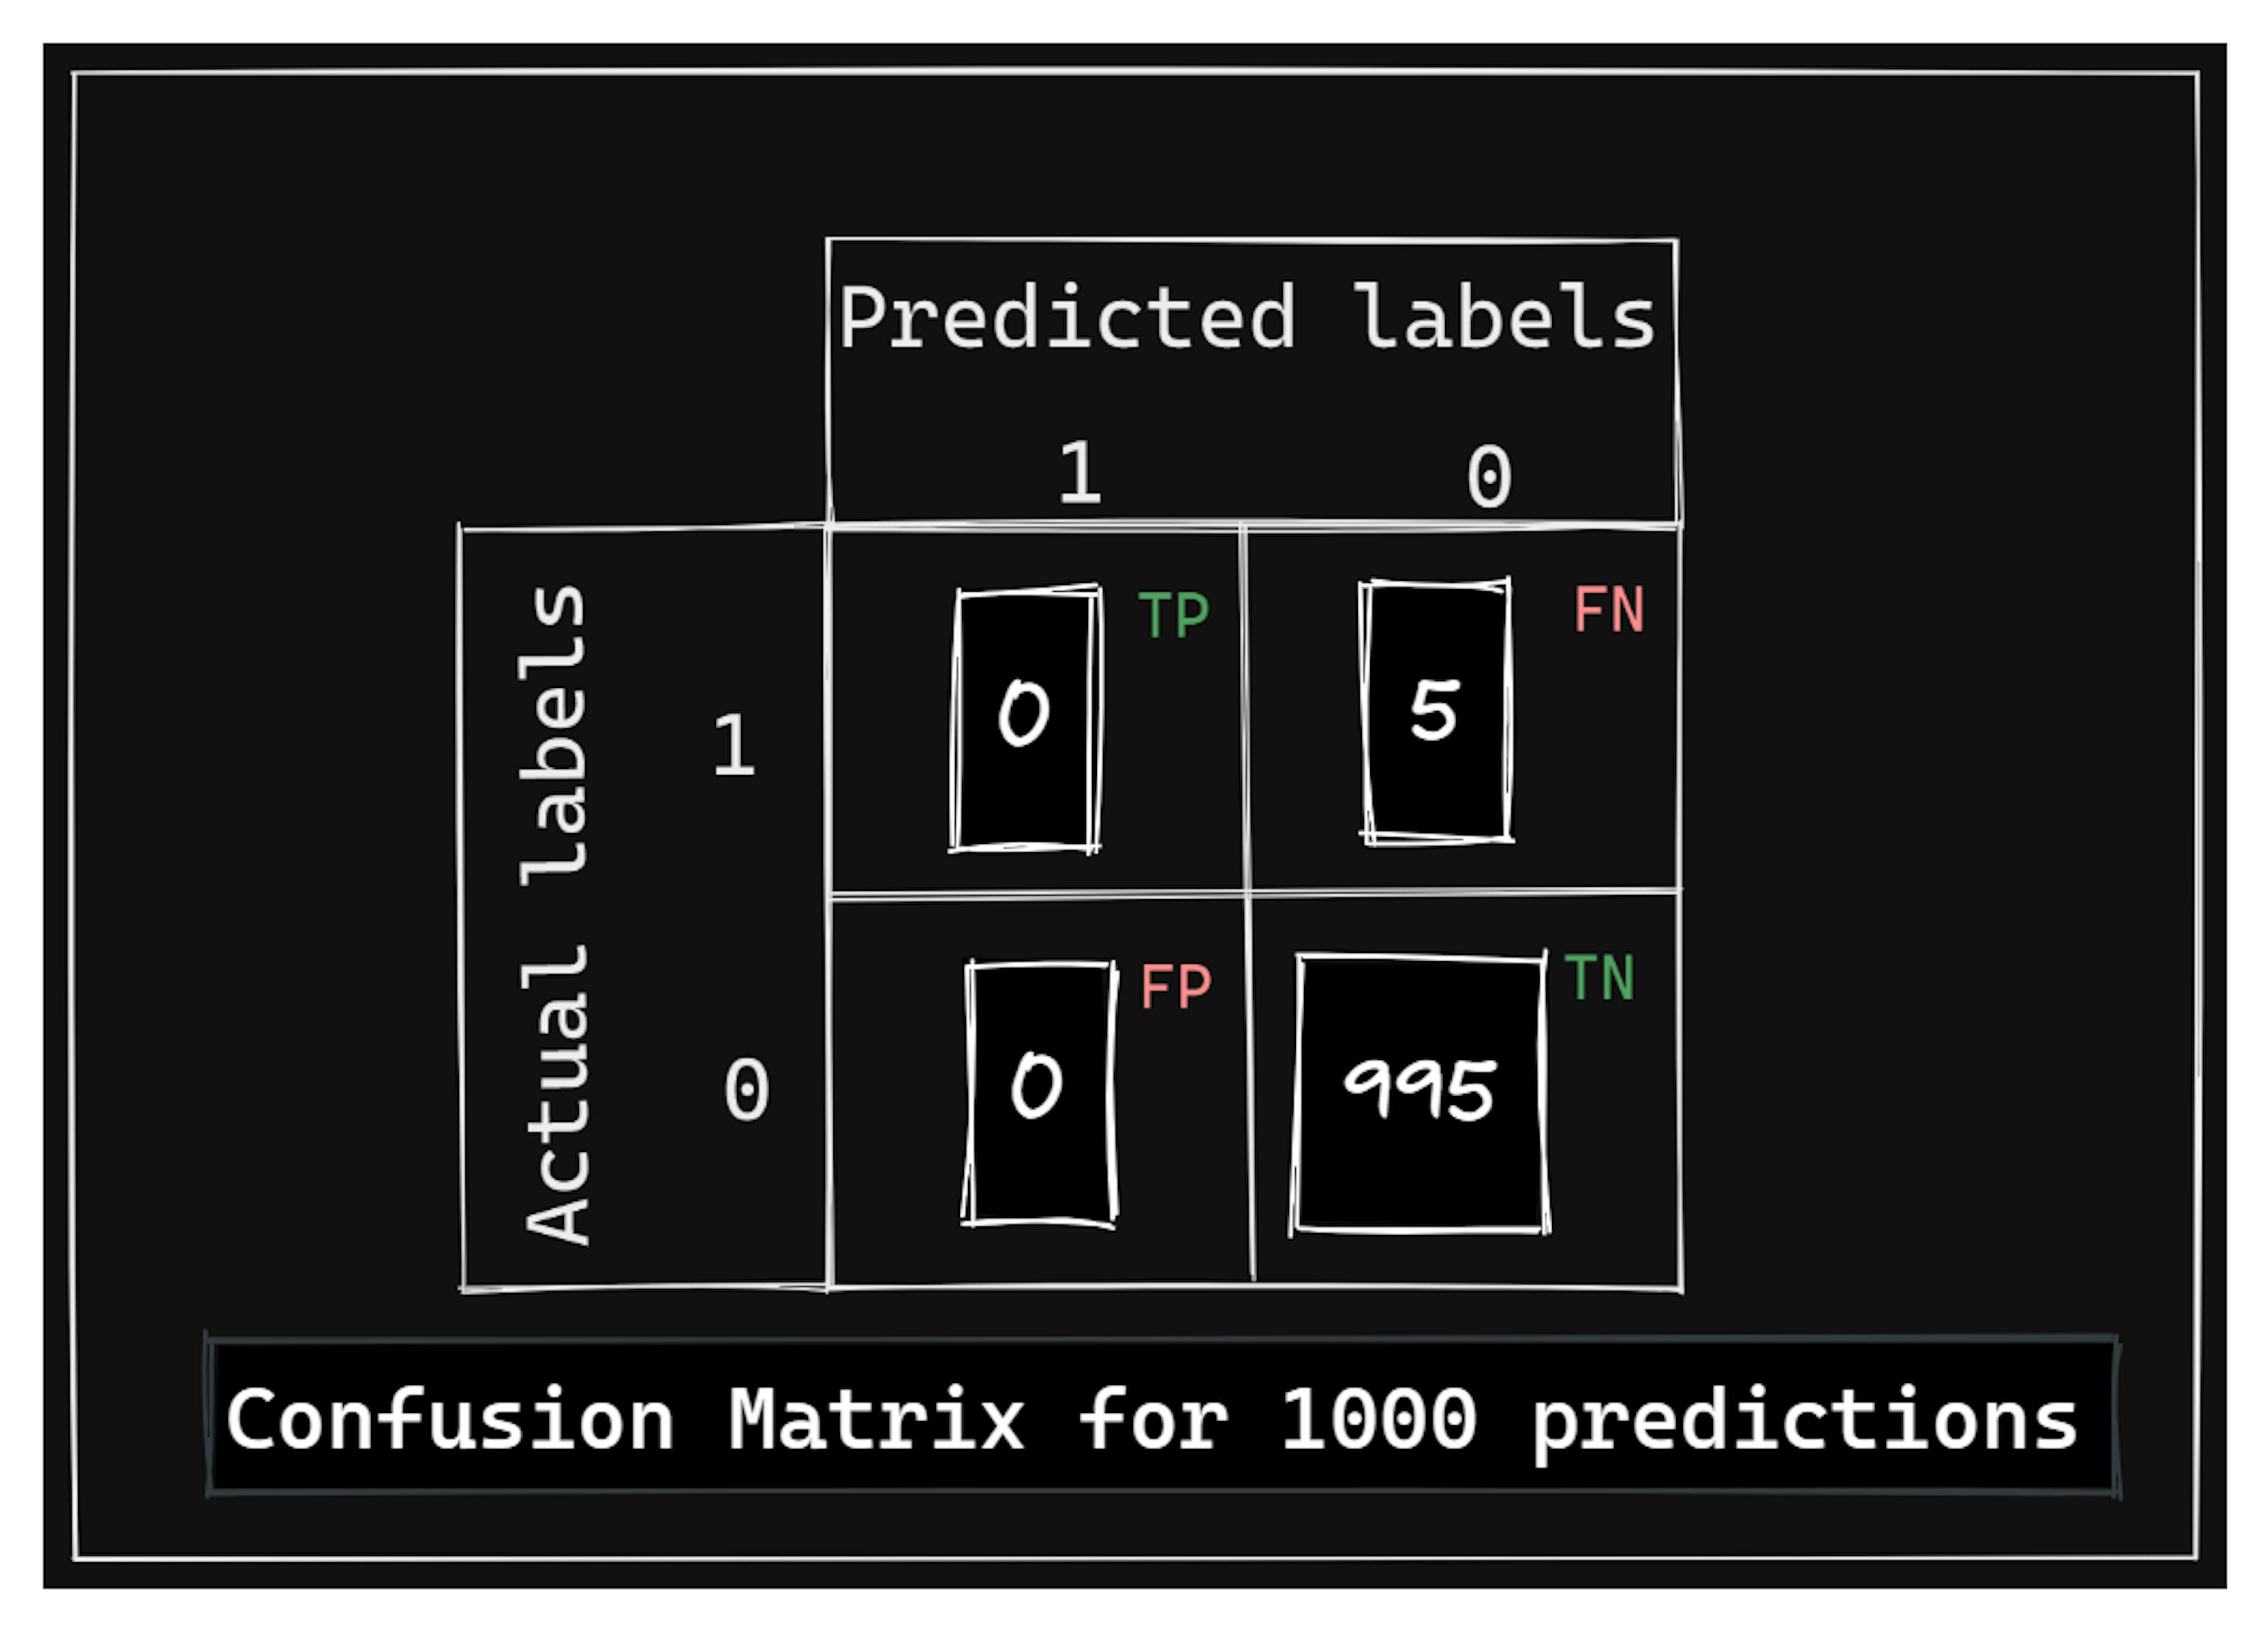 Confusion Matrix for 1000 predictions (Image by the author)